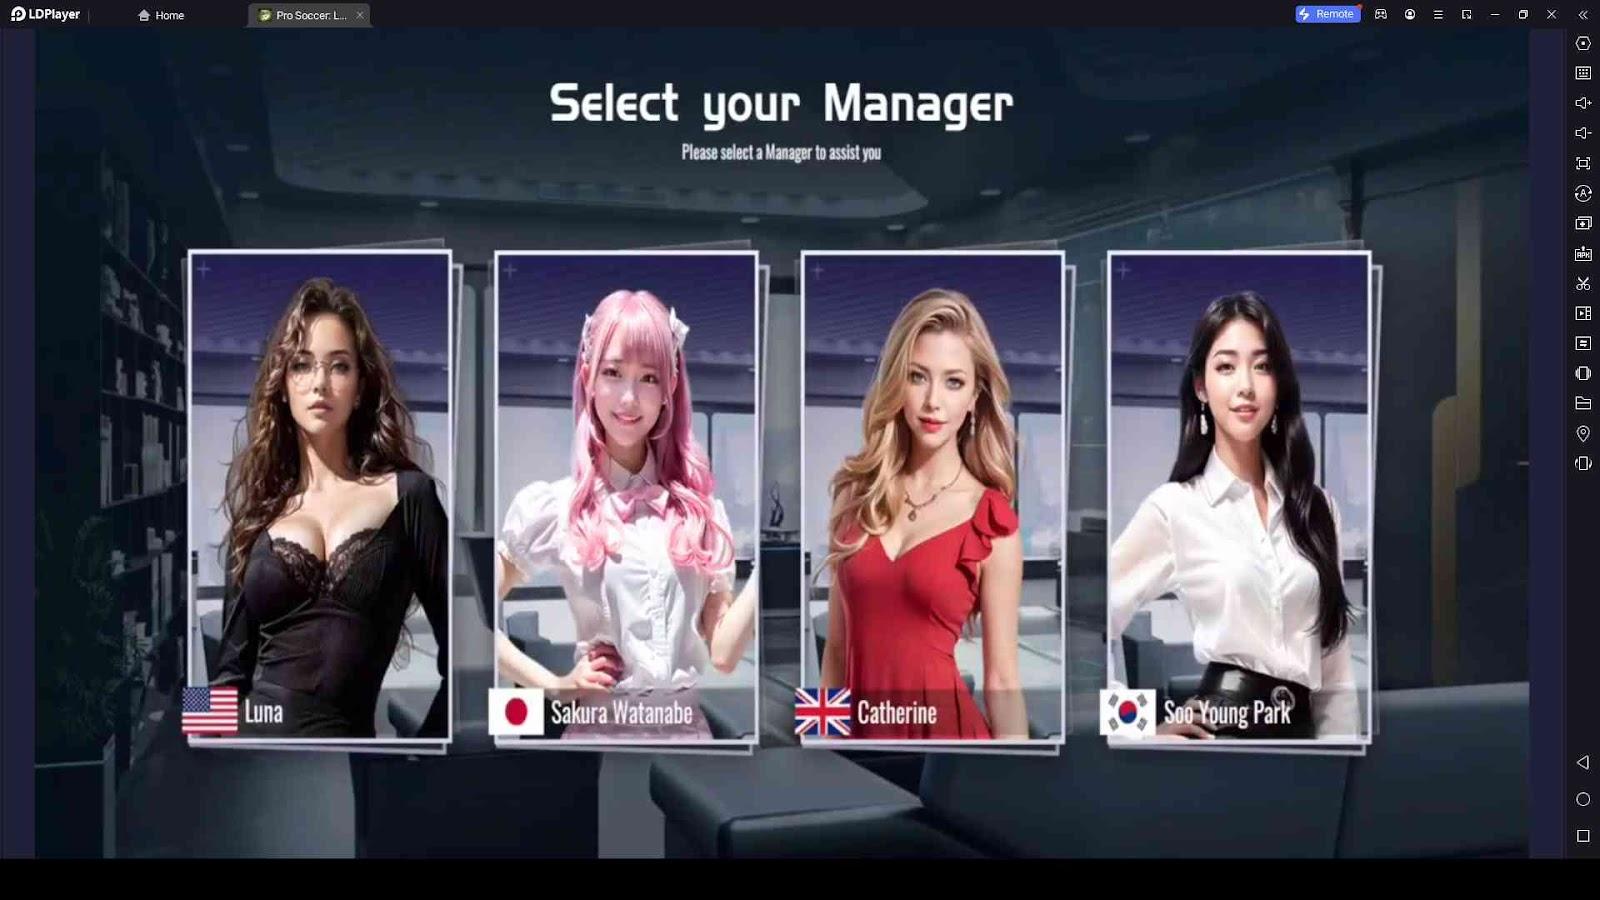 Select a Manager for the Soccer Team